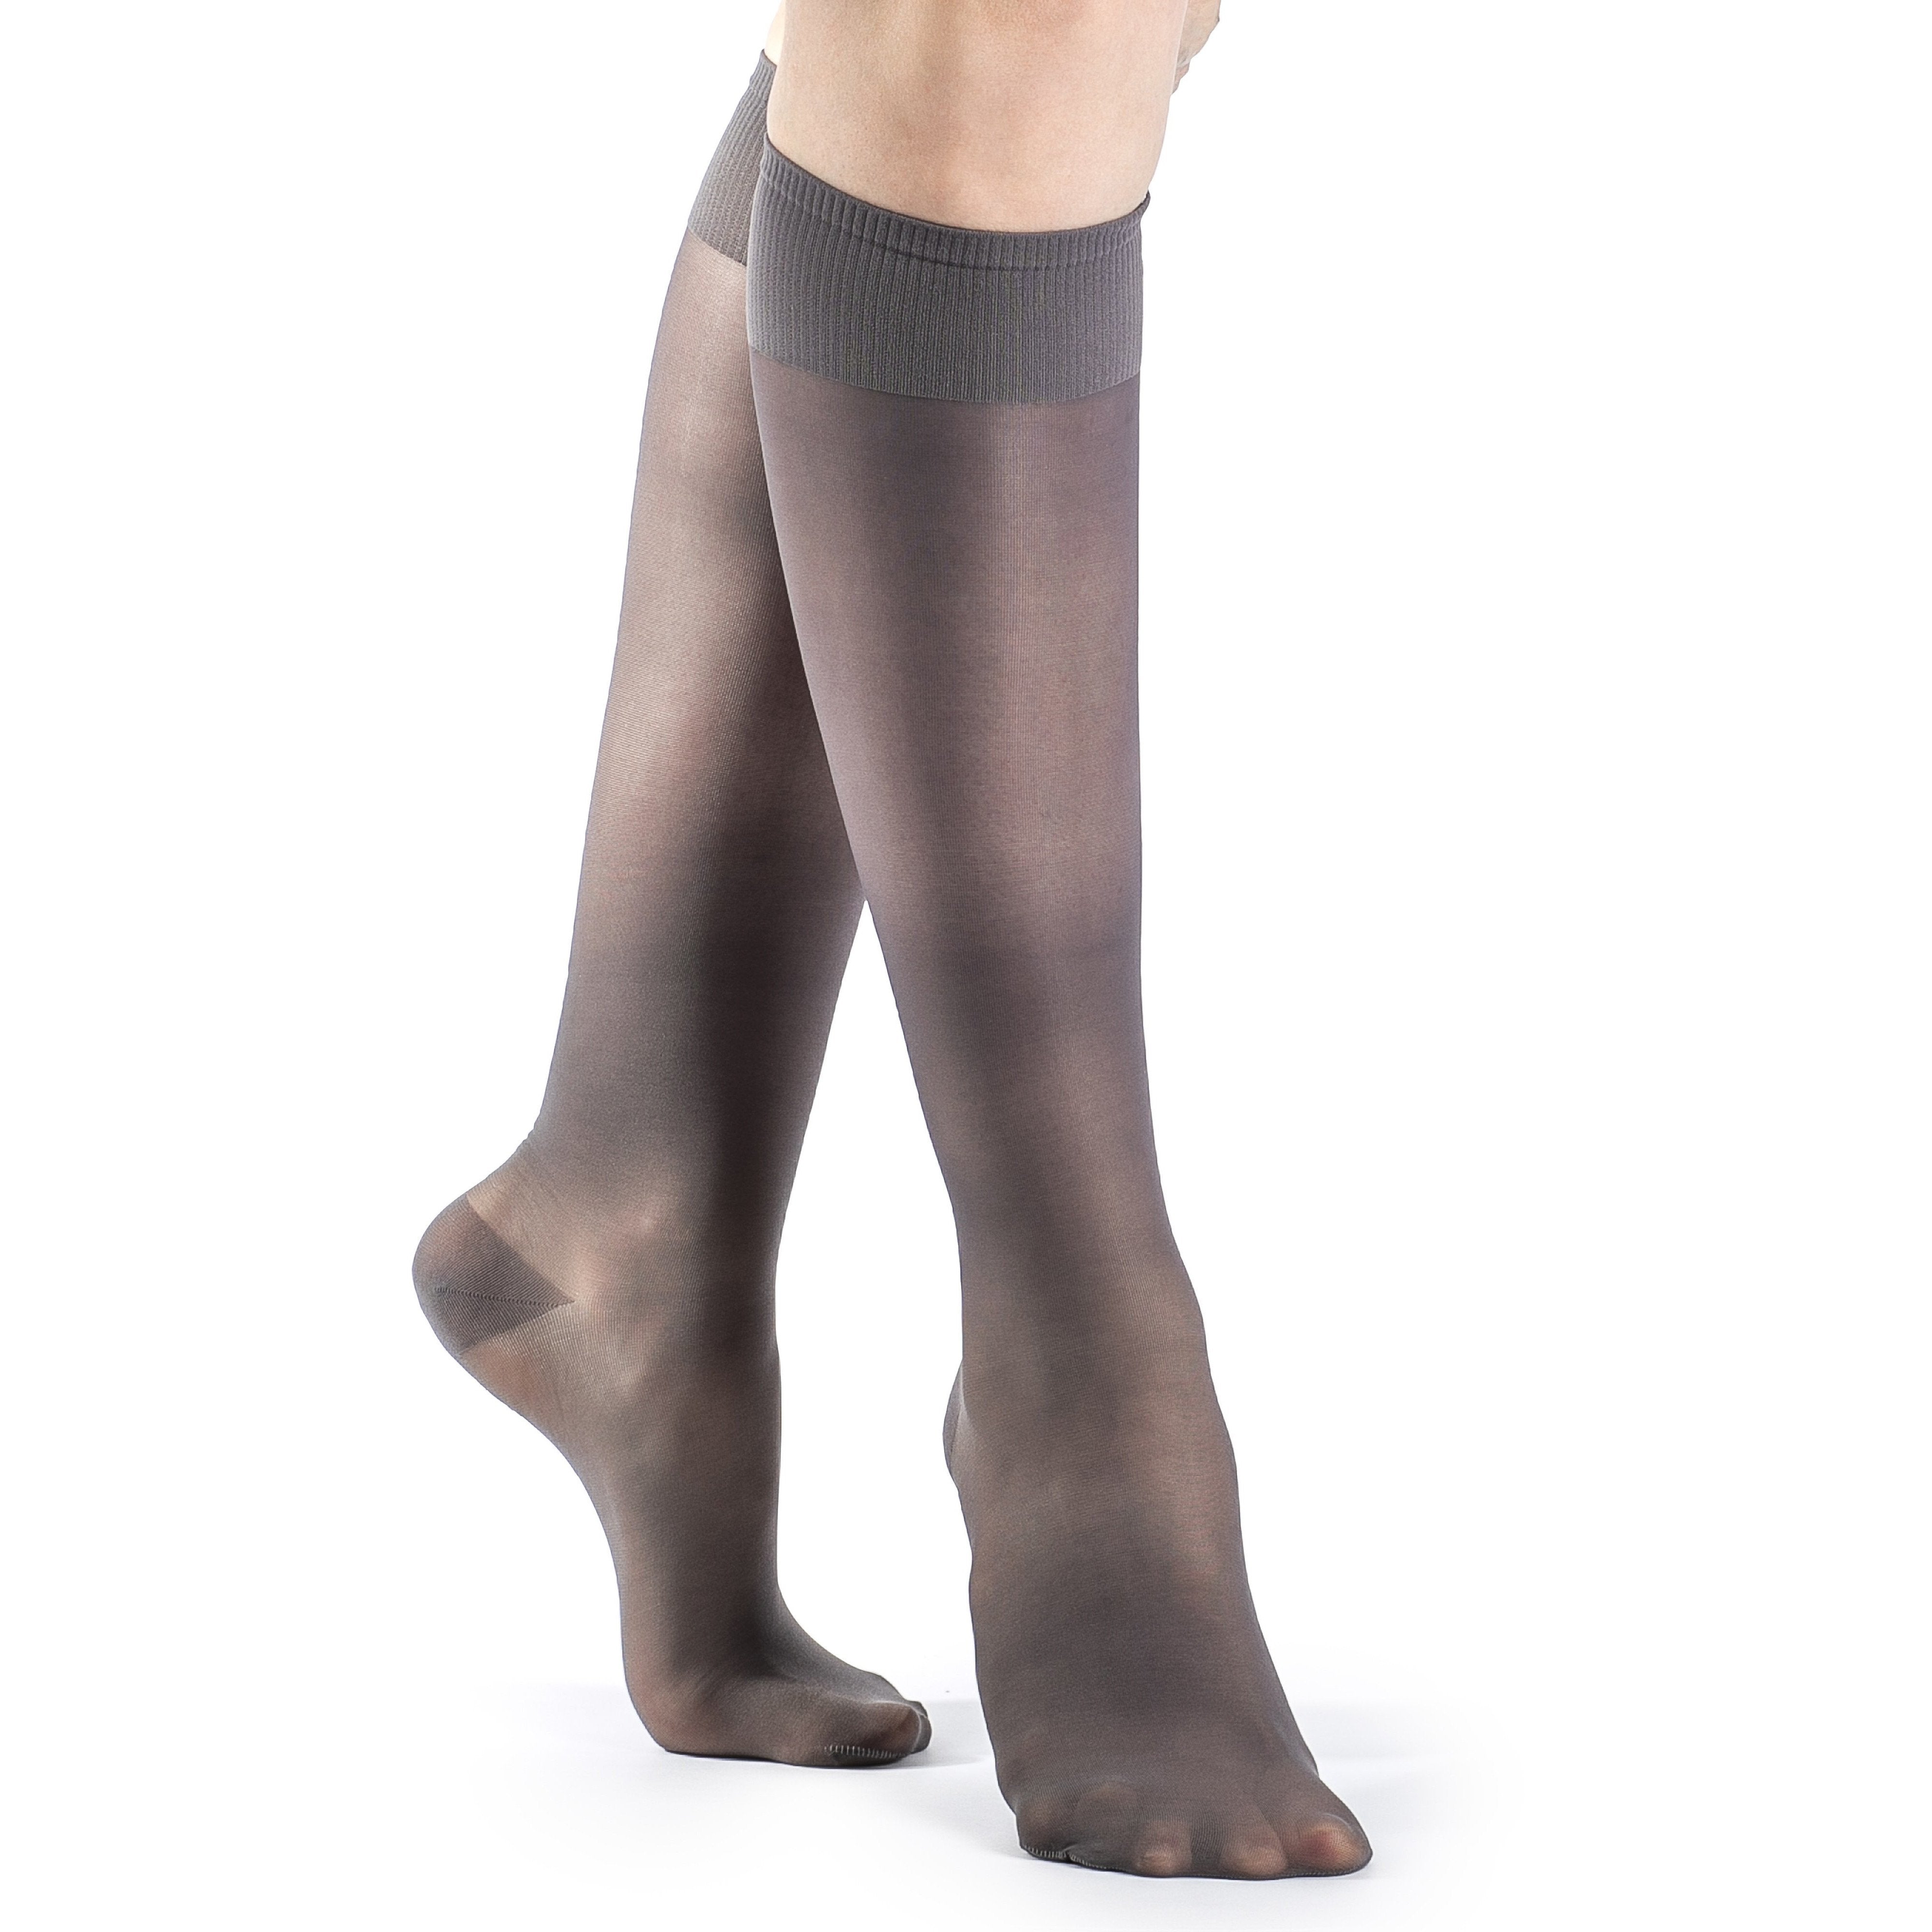 Sigvaris Women's Compression Socks & Stockings – Compression Store